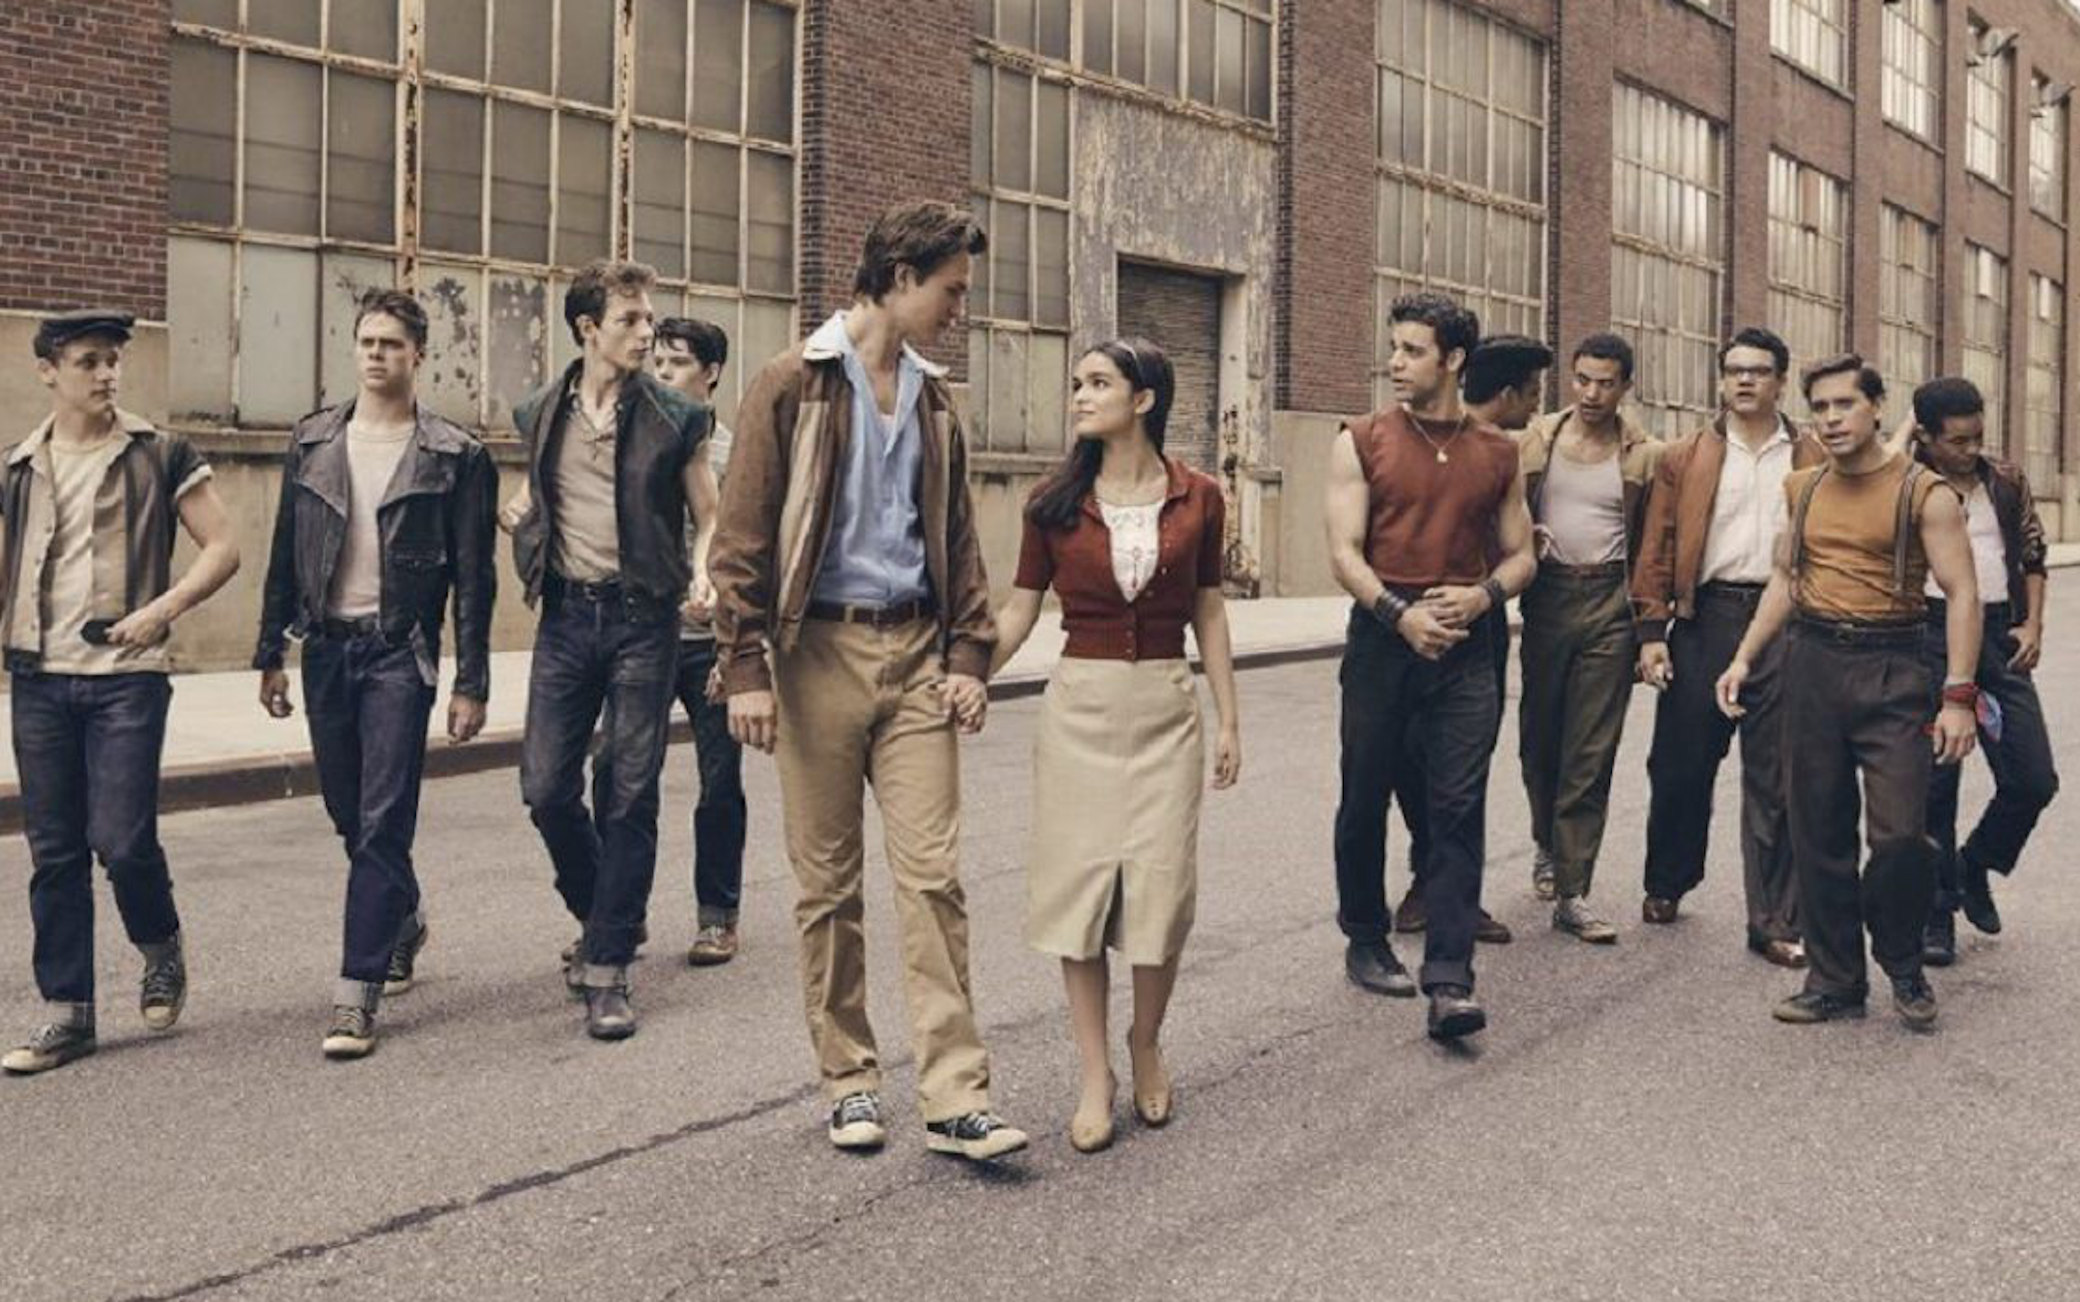 West Side Story review